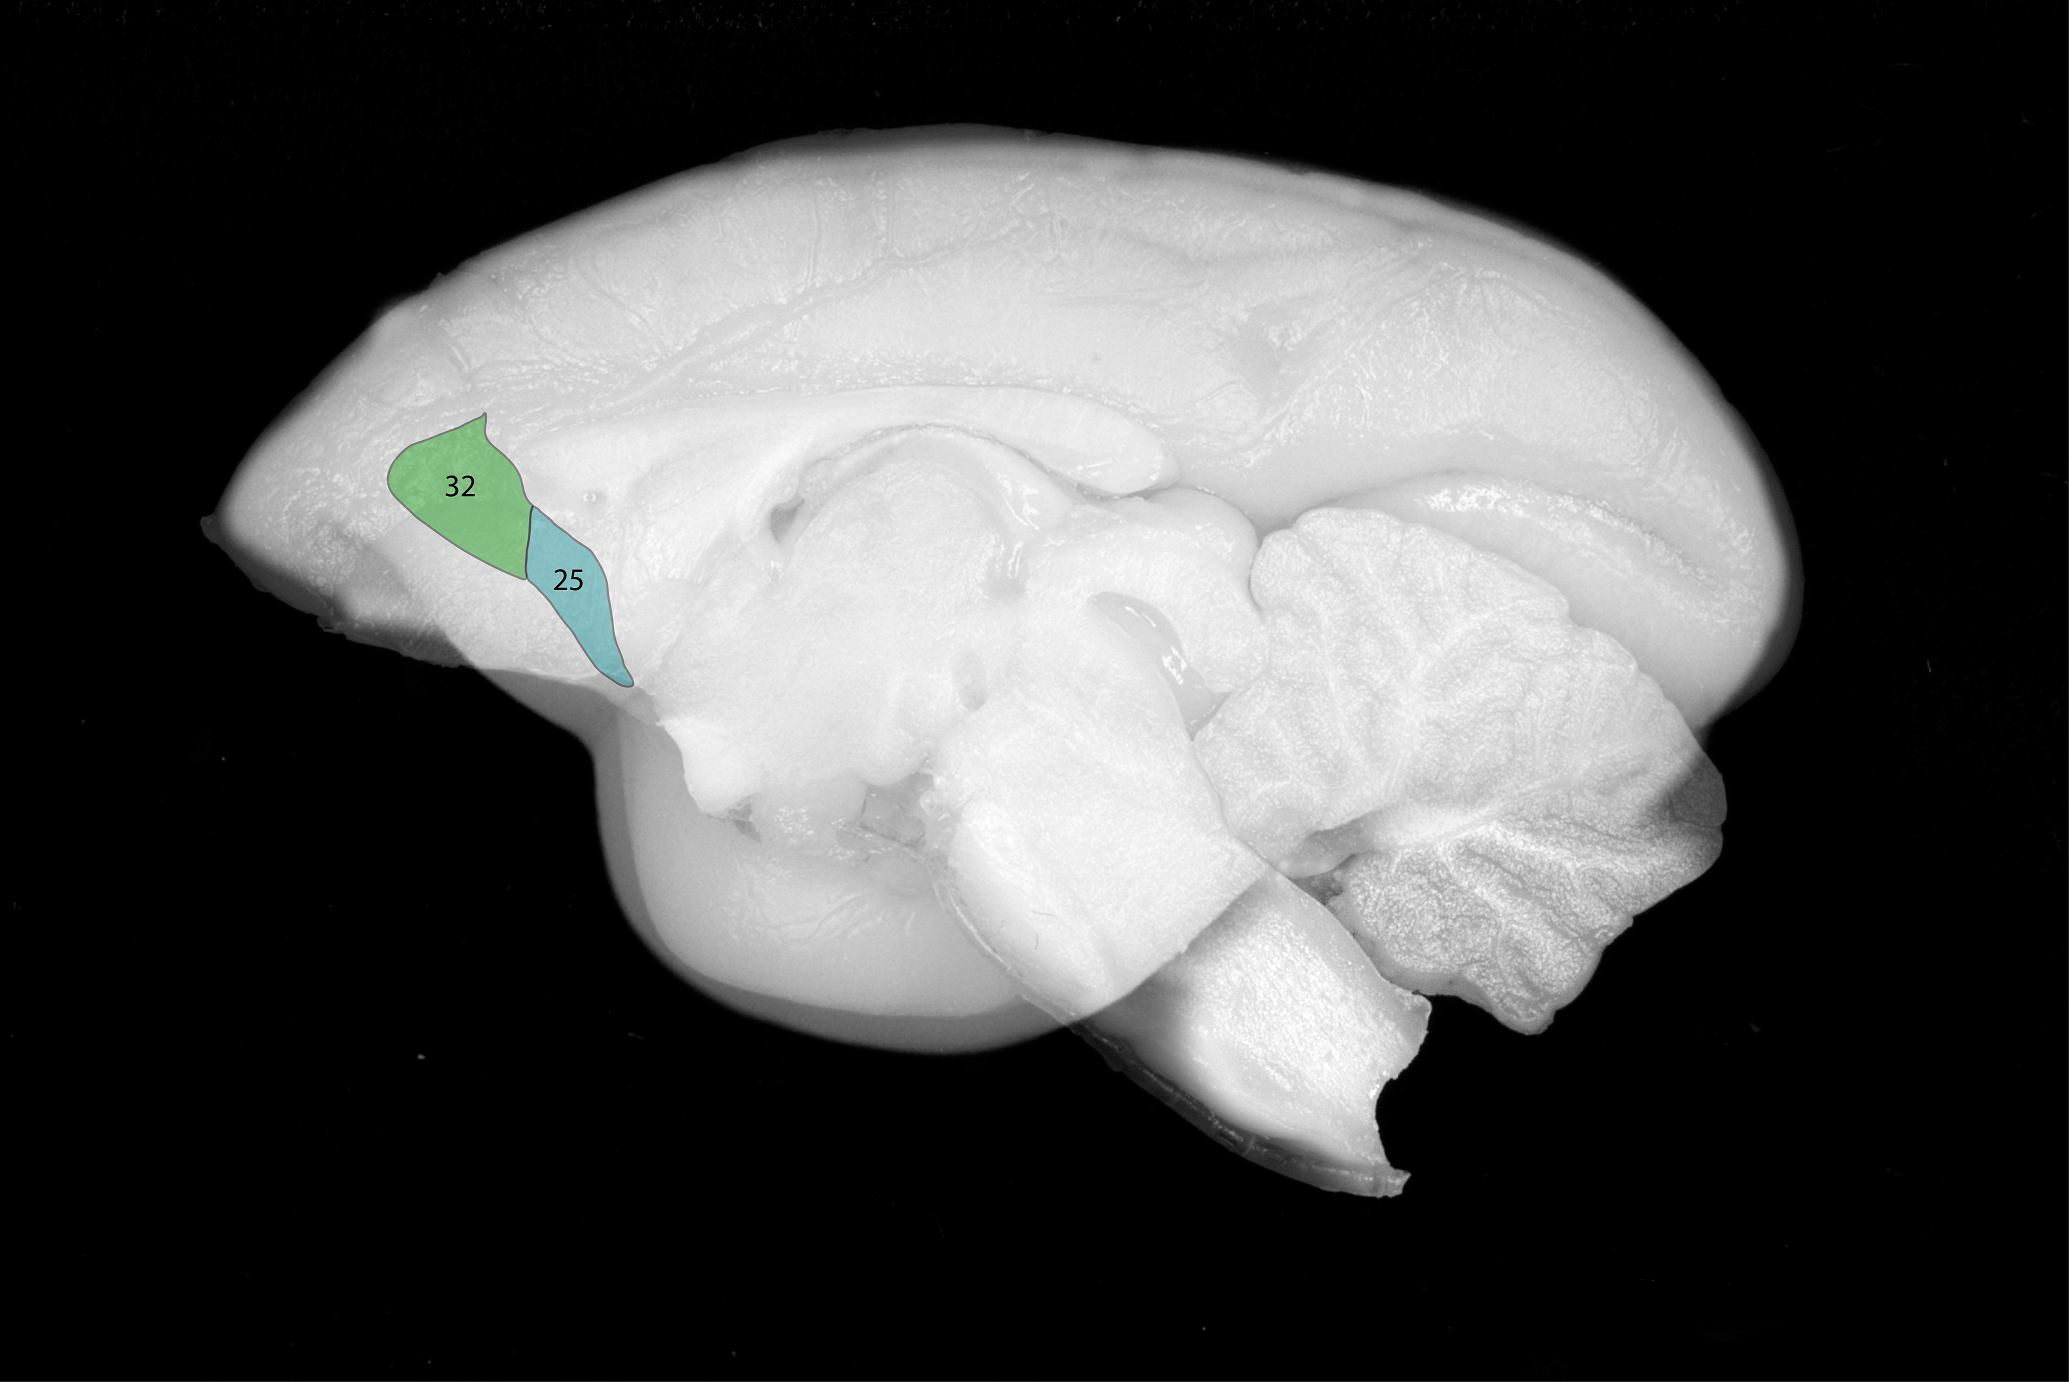 Marmoset brain with Areas 25 and 32 highlighted